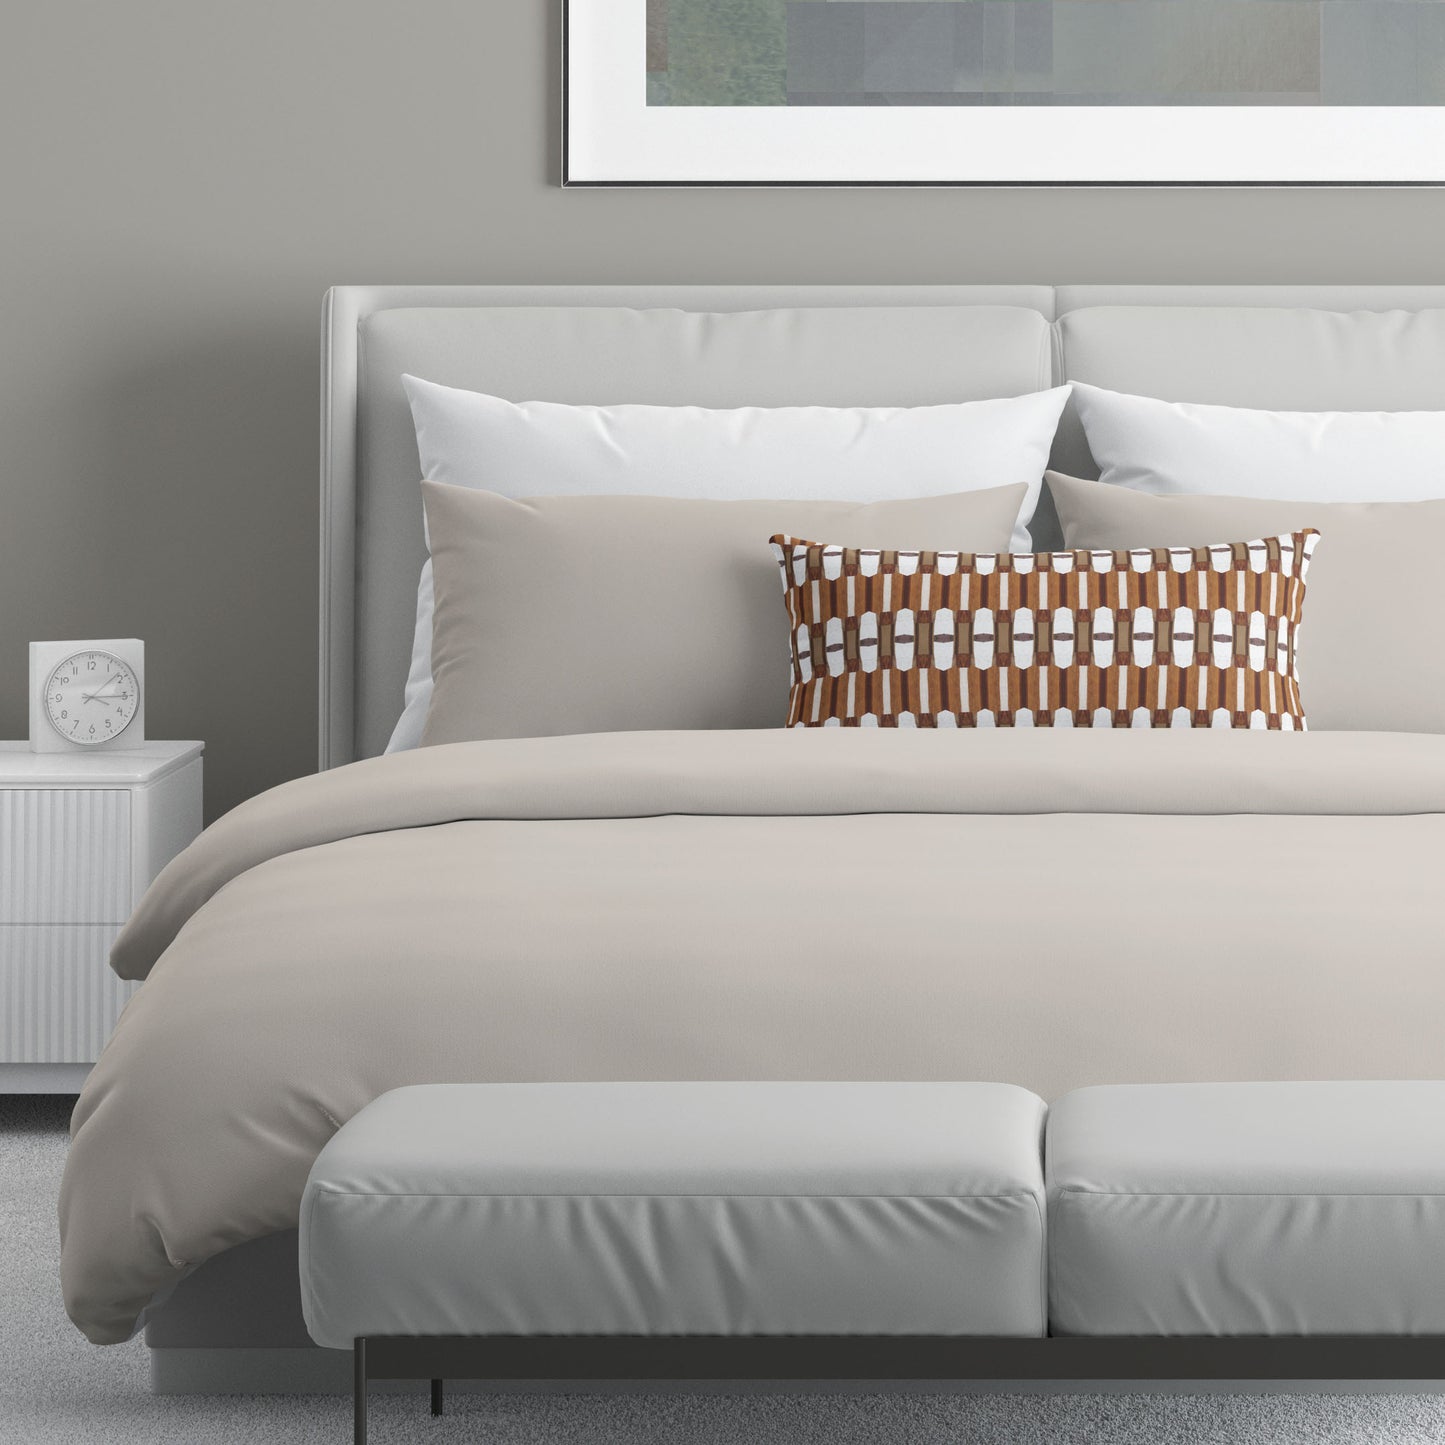 Neutral colored bedroom featuring a bed with a brown and white abstract patterned lumbar pillow.